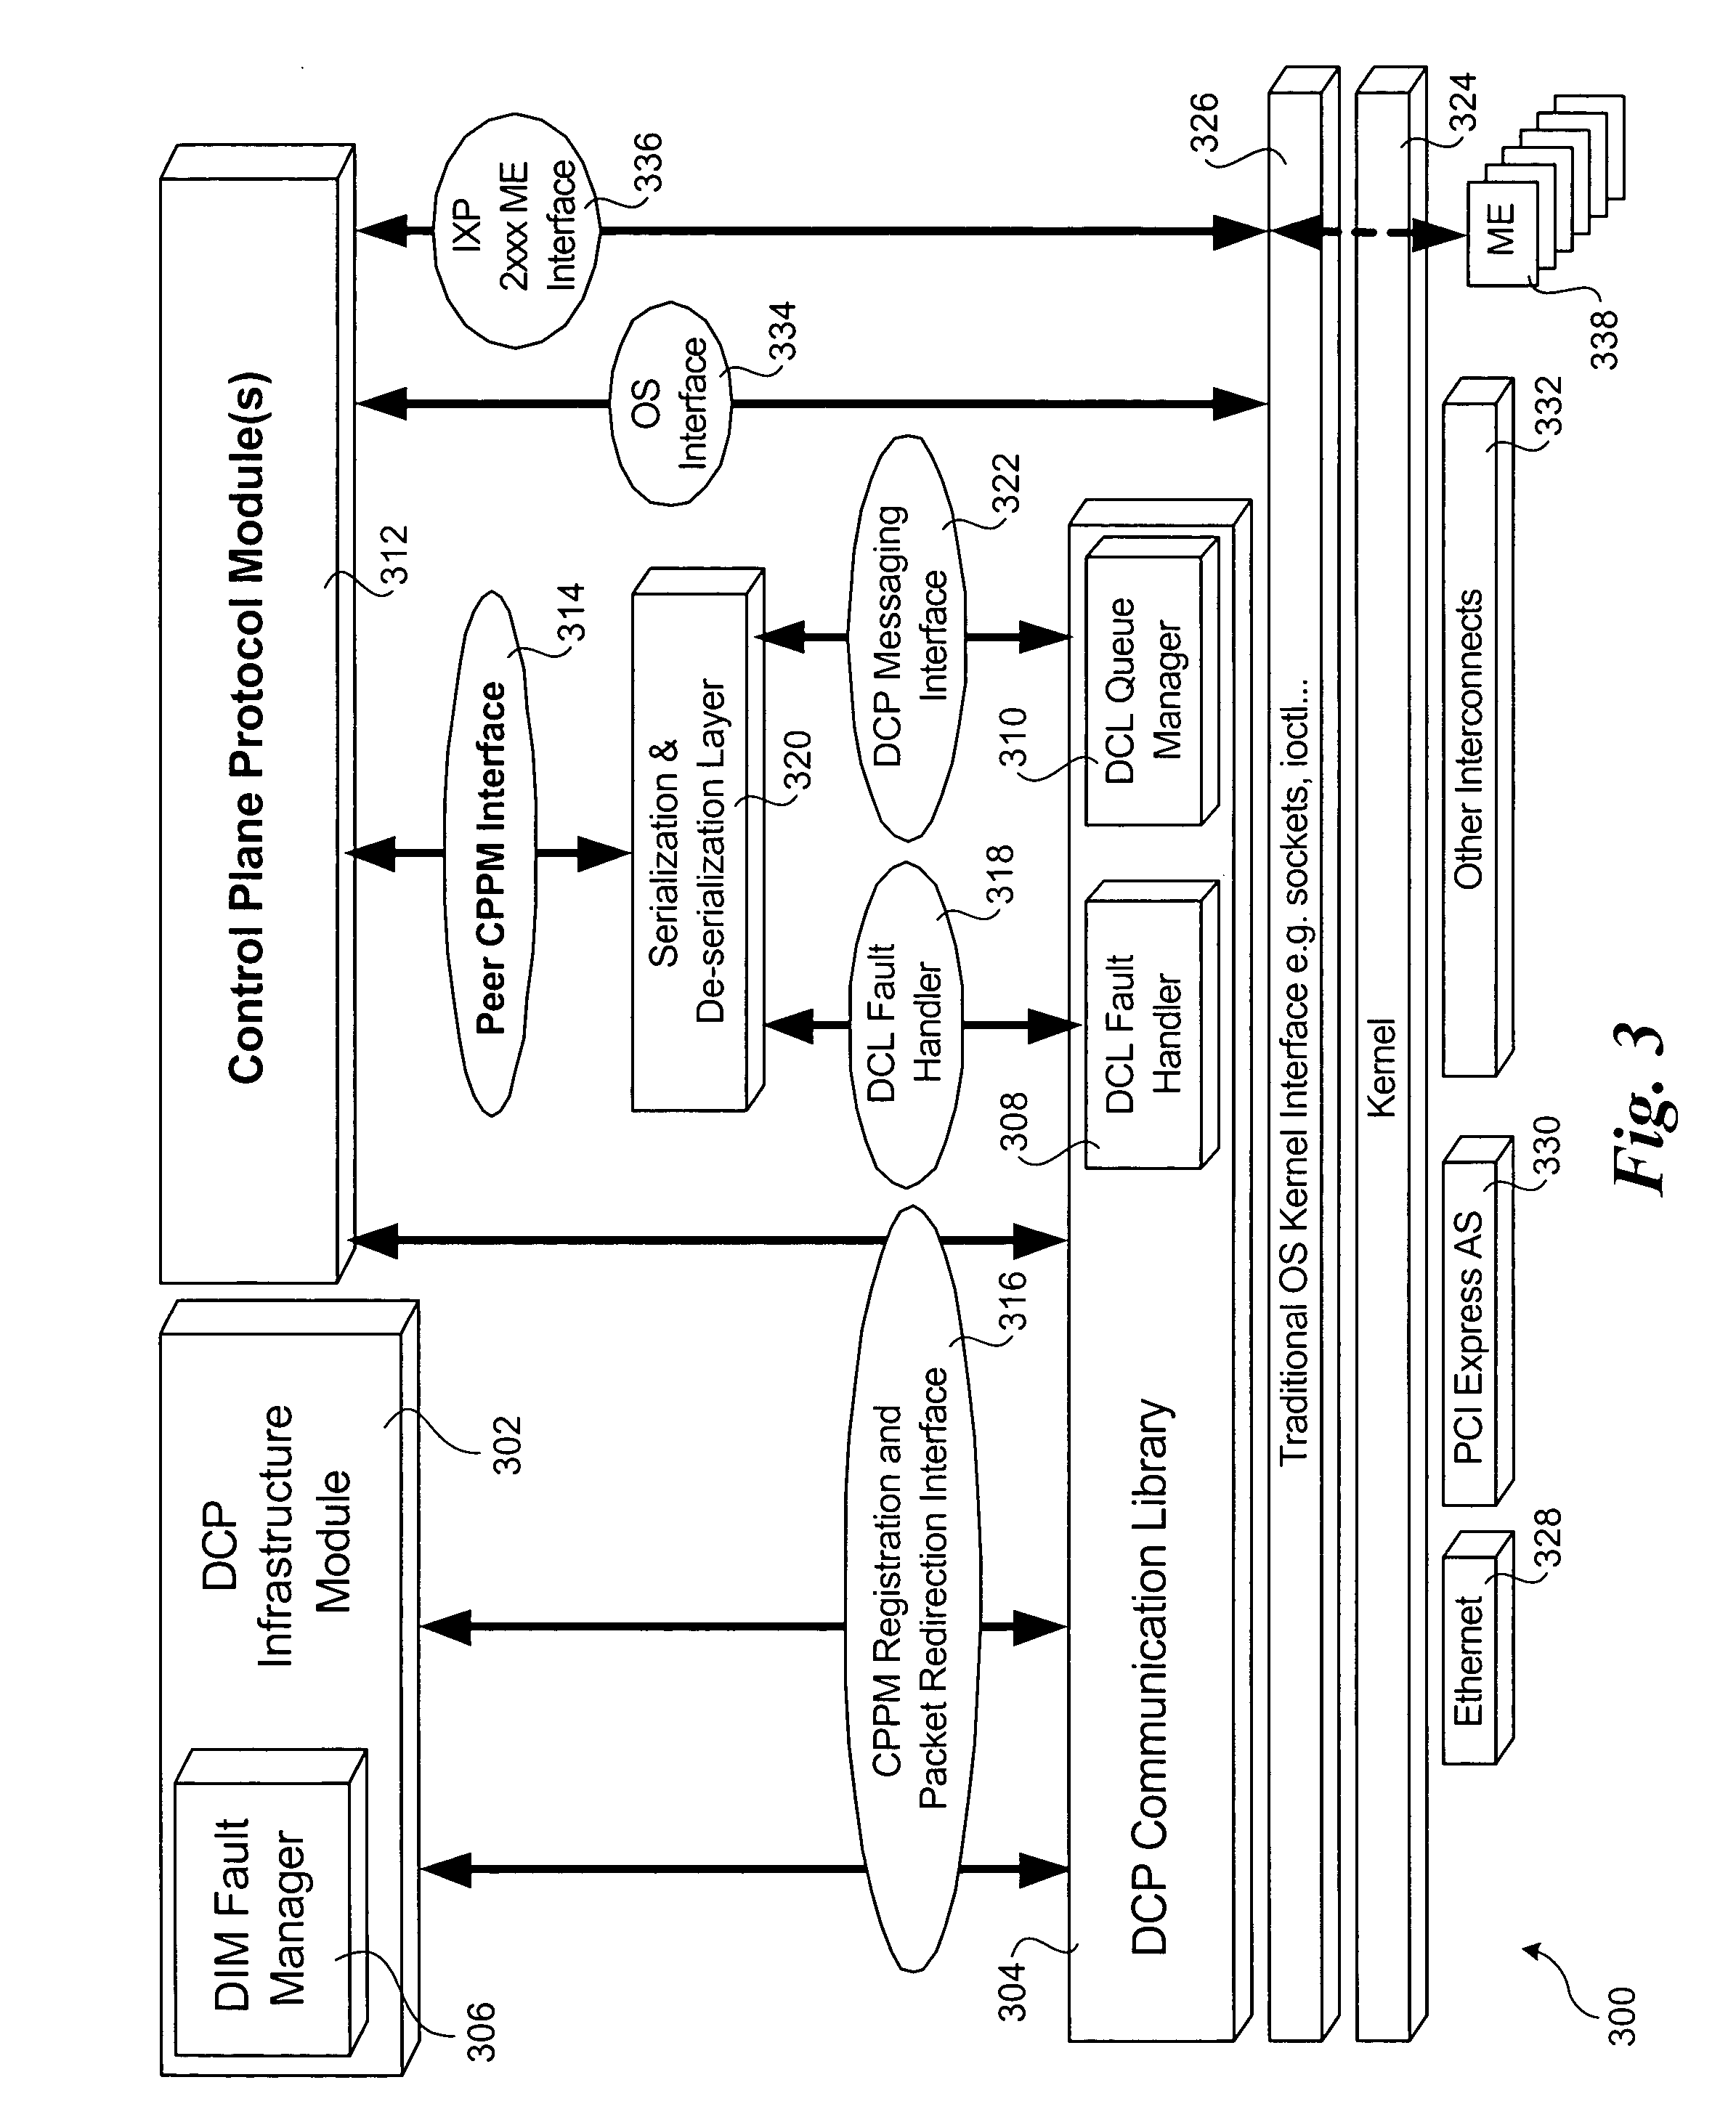 Method to provide high availability in network elements using distributed architectures